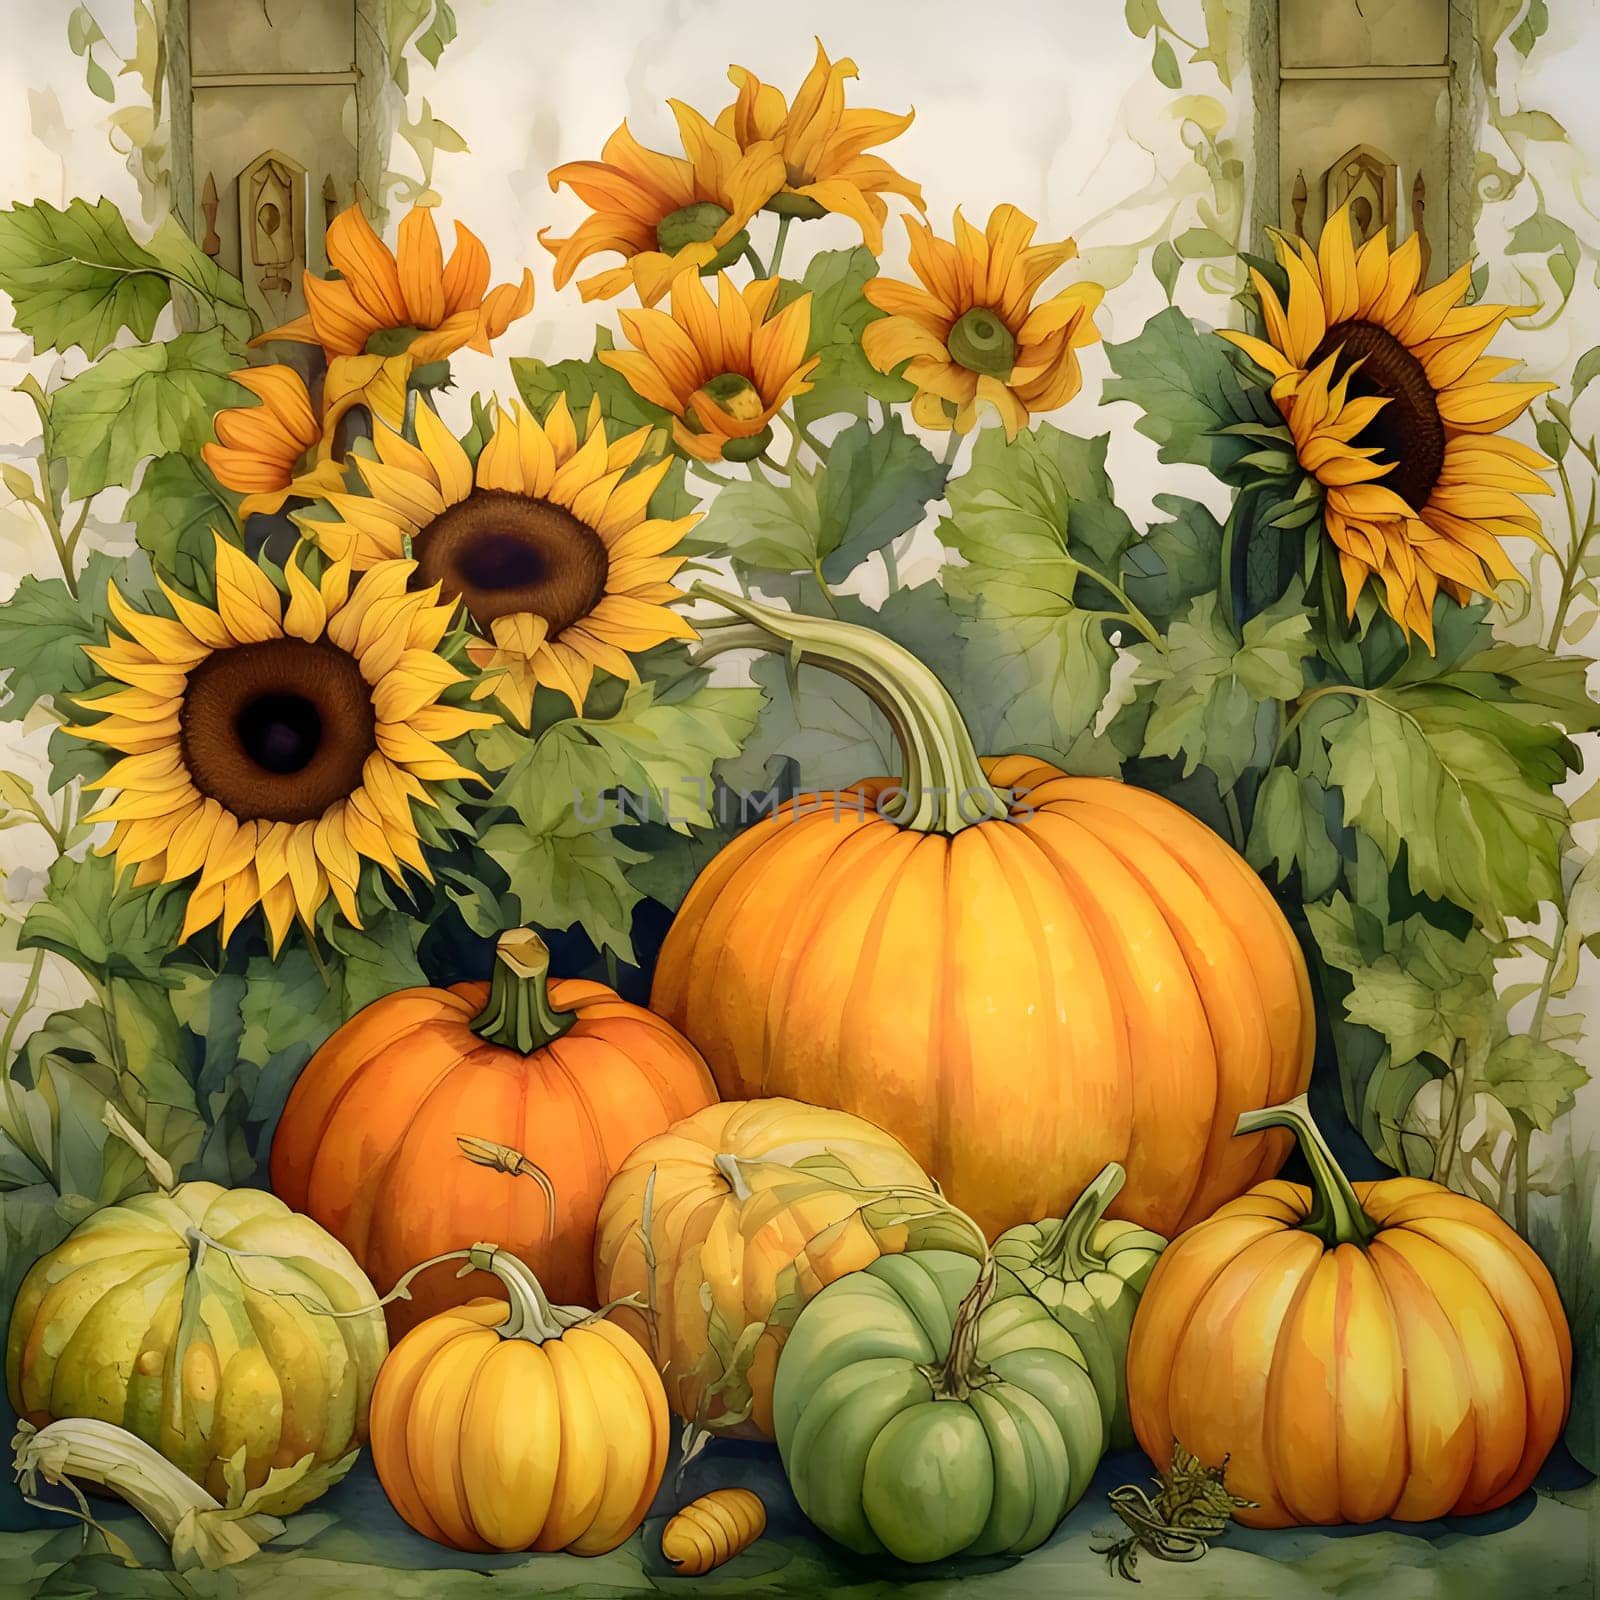 Illustration, sunflowers and pumpkins under them. Pumpkin as a dish of thanksgiving for the harvest. by ThemesS